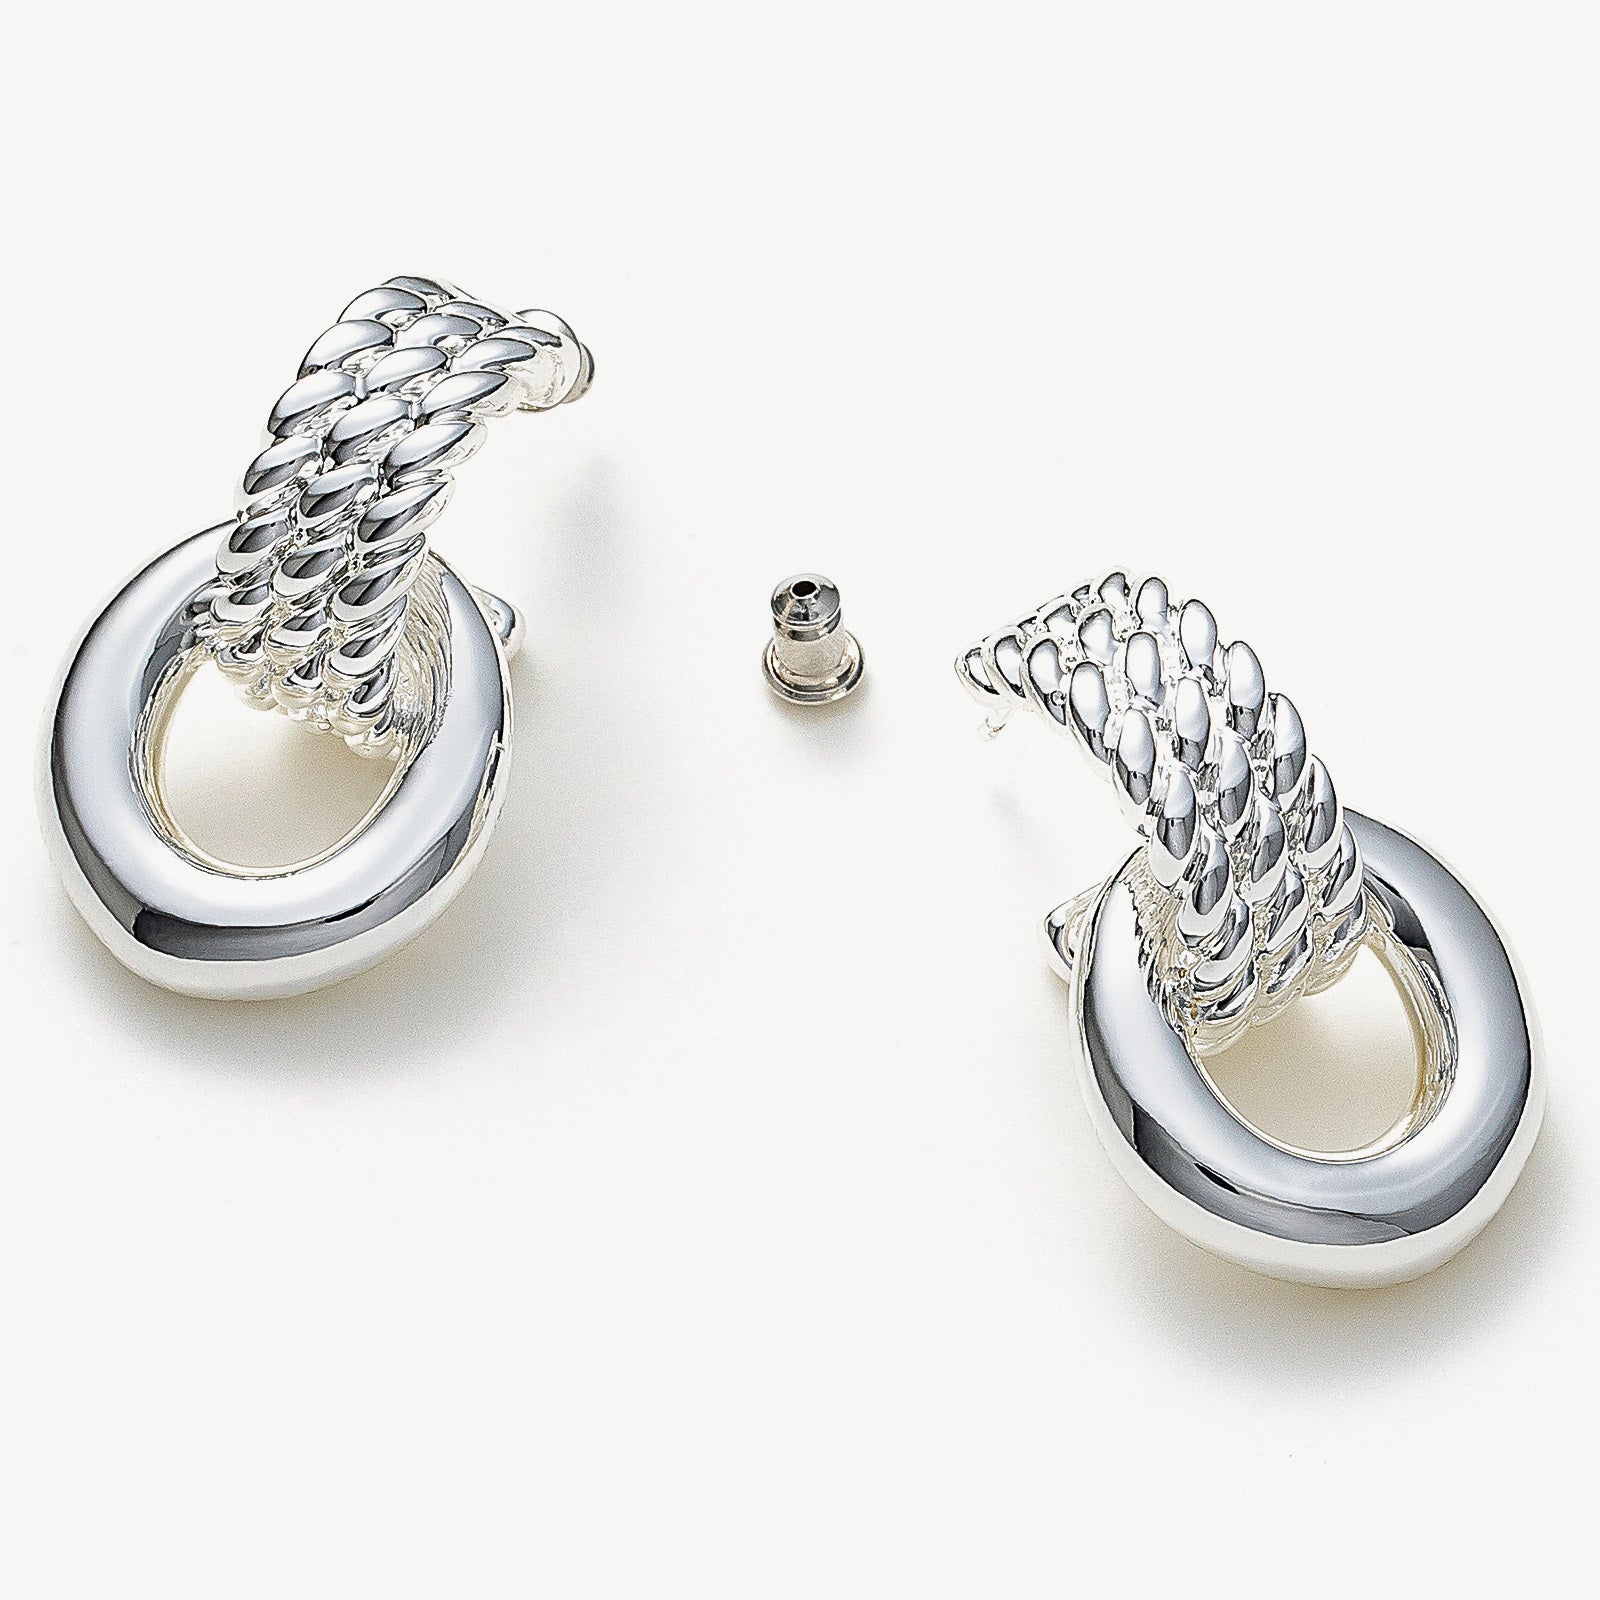 Ring Entwine Chunky Earrings, showcasing a modern twist with silver entwined rings, these earrings bring a touch of contemporary style to your overall look